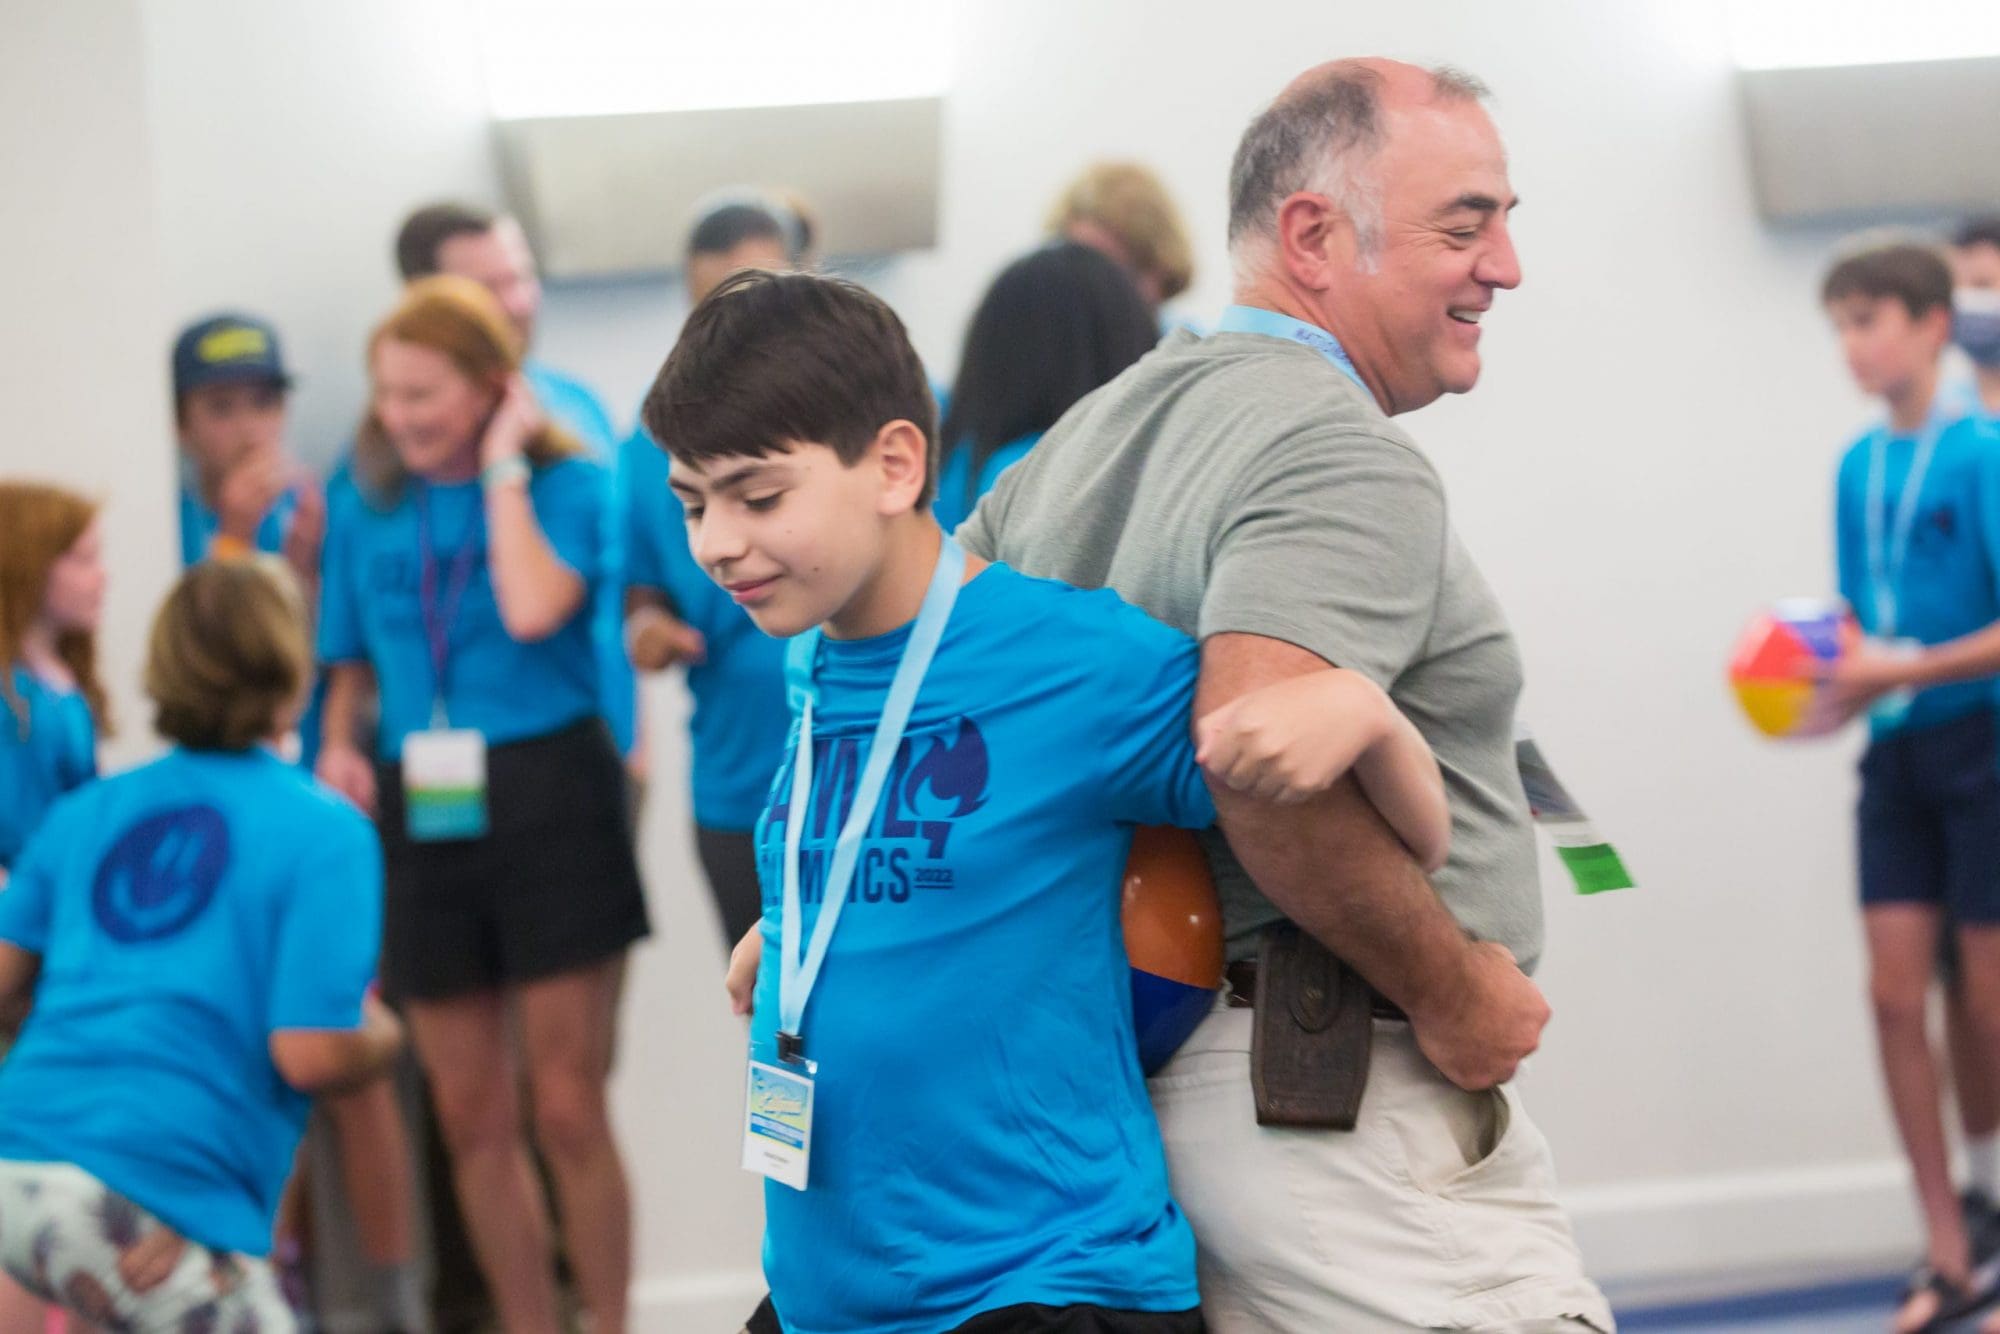 A joyful father embracing his young son at a crowded indoor event. Both are smiling and wearing blue shirts with lanyards, indicating they are part of a group or attending a specific function.